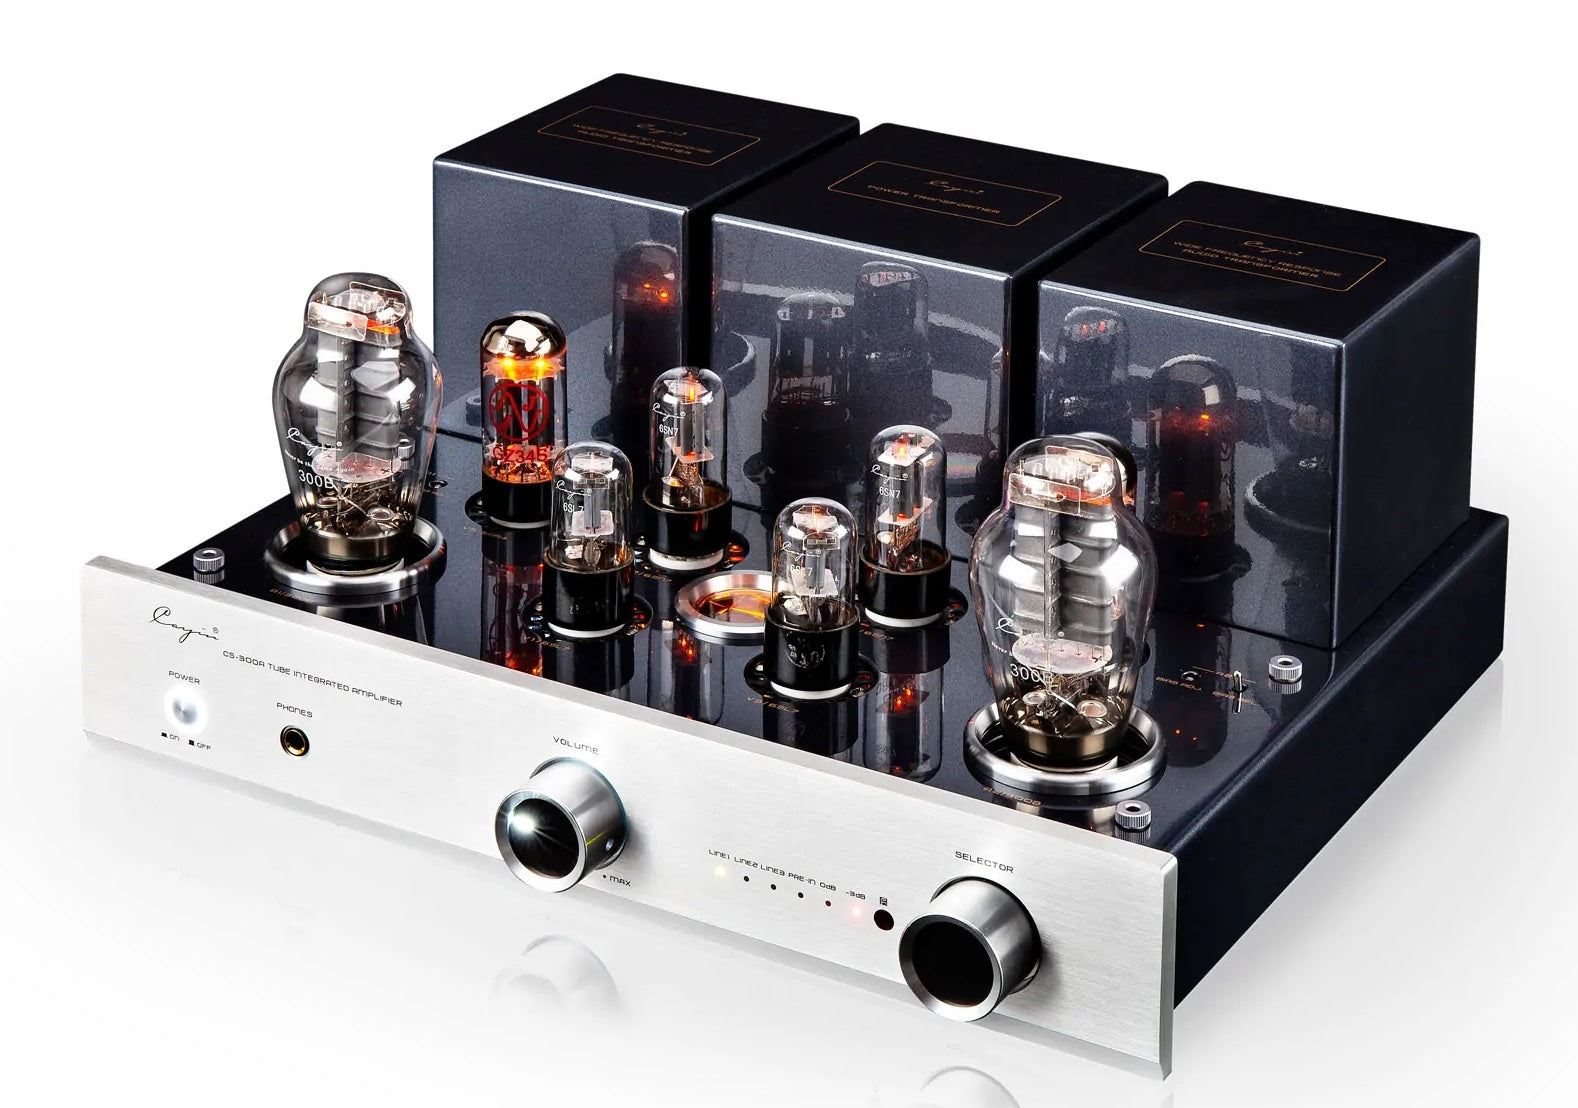 [PM best price] Cayin CS-300A [230V version] - 300B Single-Ended Triode Tube Class A Integrated Amplifier for Speakers